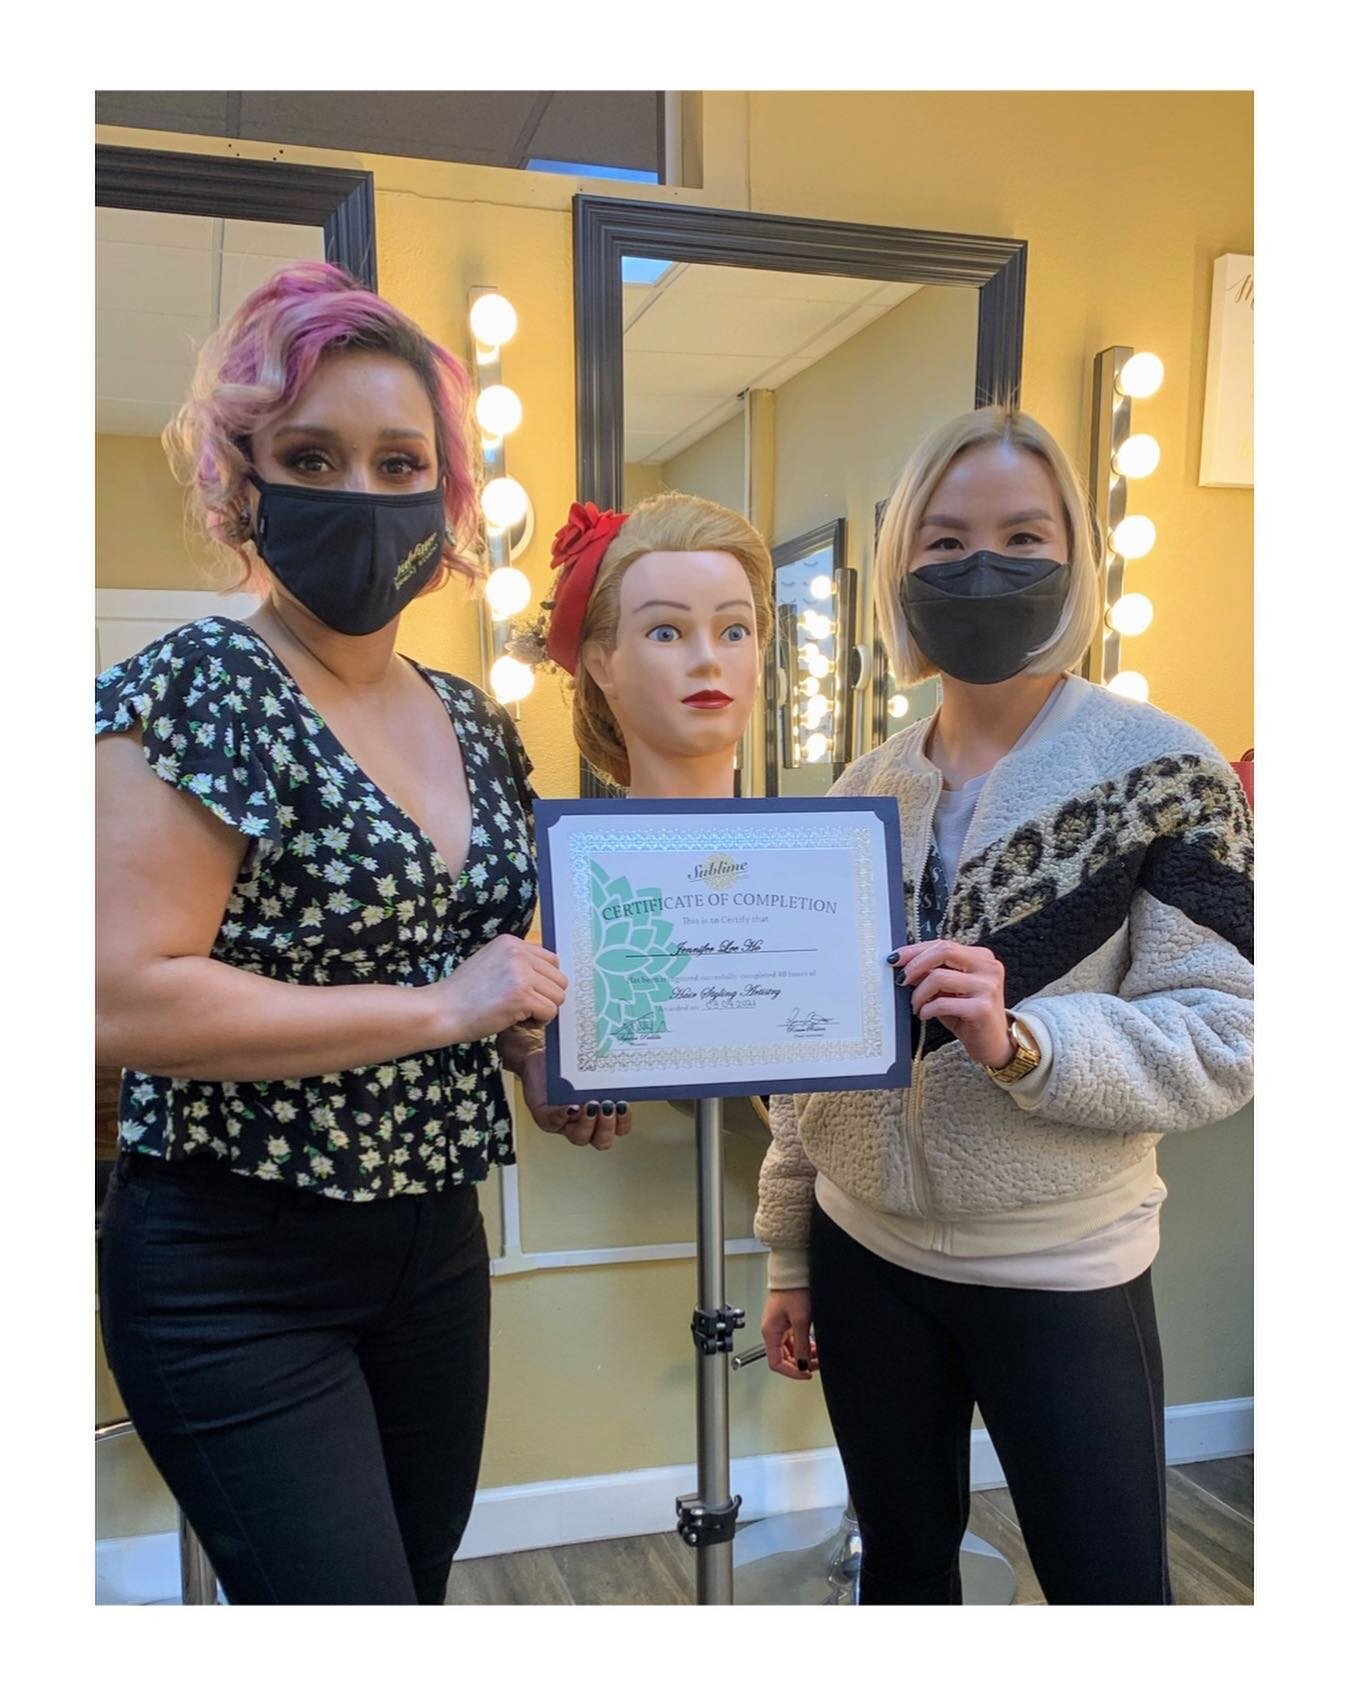 I&rsquo;m so proud to say that finished my bridal hairstyling classes and am now certified!  Hairstyling will always be a work in progress for me, but I&rsquo;m getting there! Biggest thank you to @prettylilrenee for teaching me all your bridal hair 